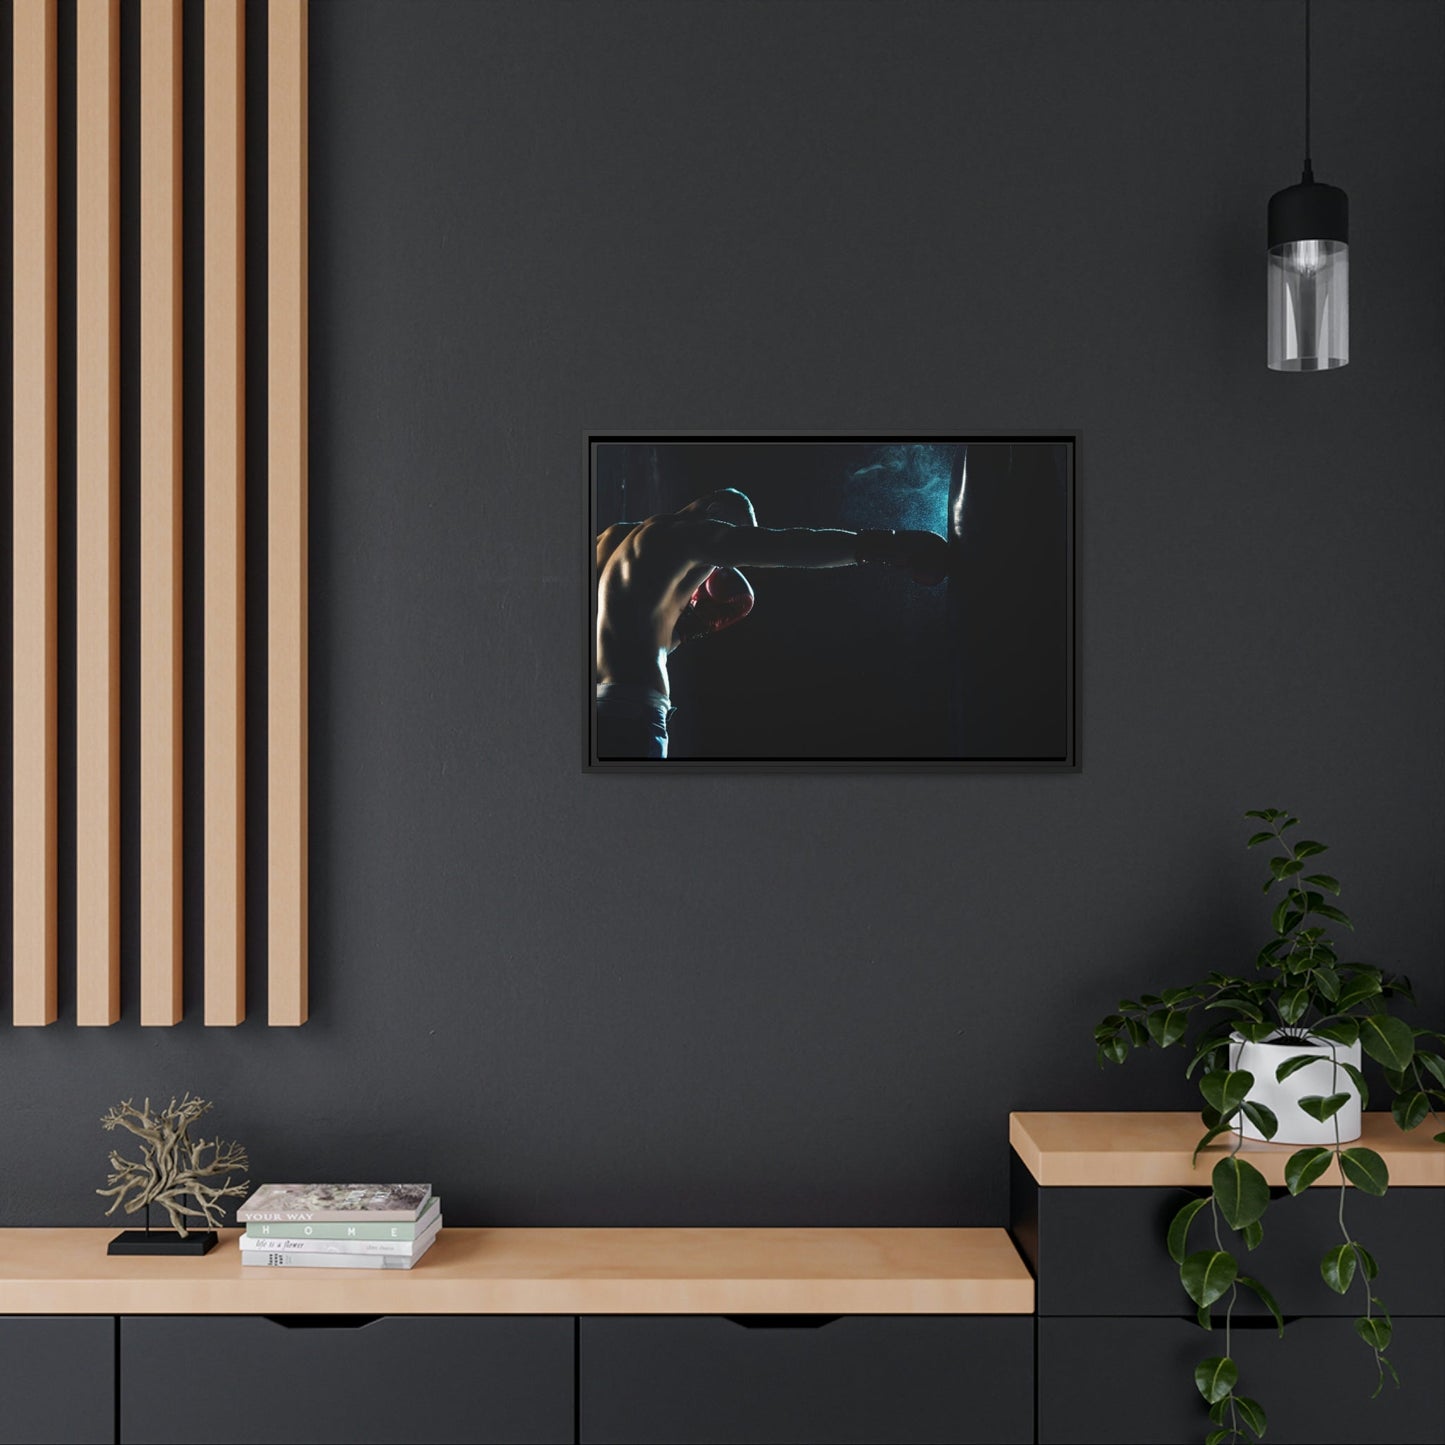 Boxing Dreams: Wall Art and Print on Canvas with Dreamy Boxing Art